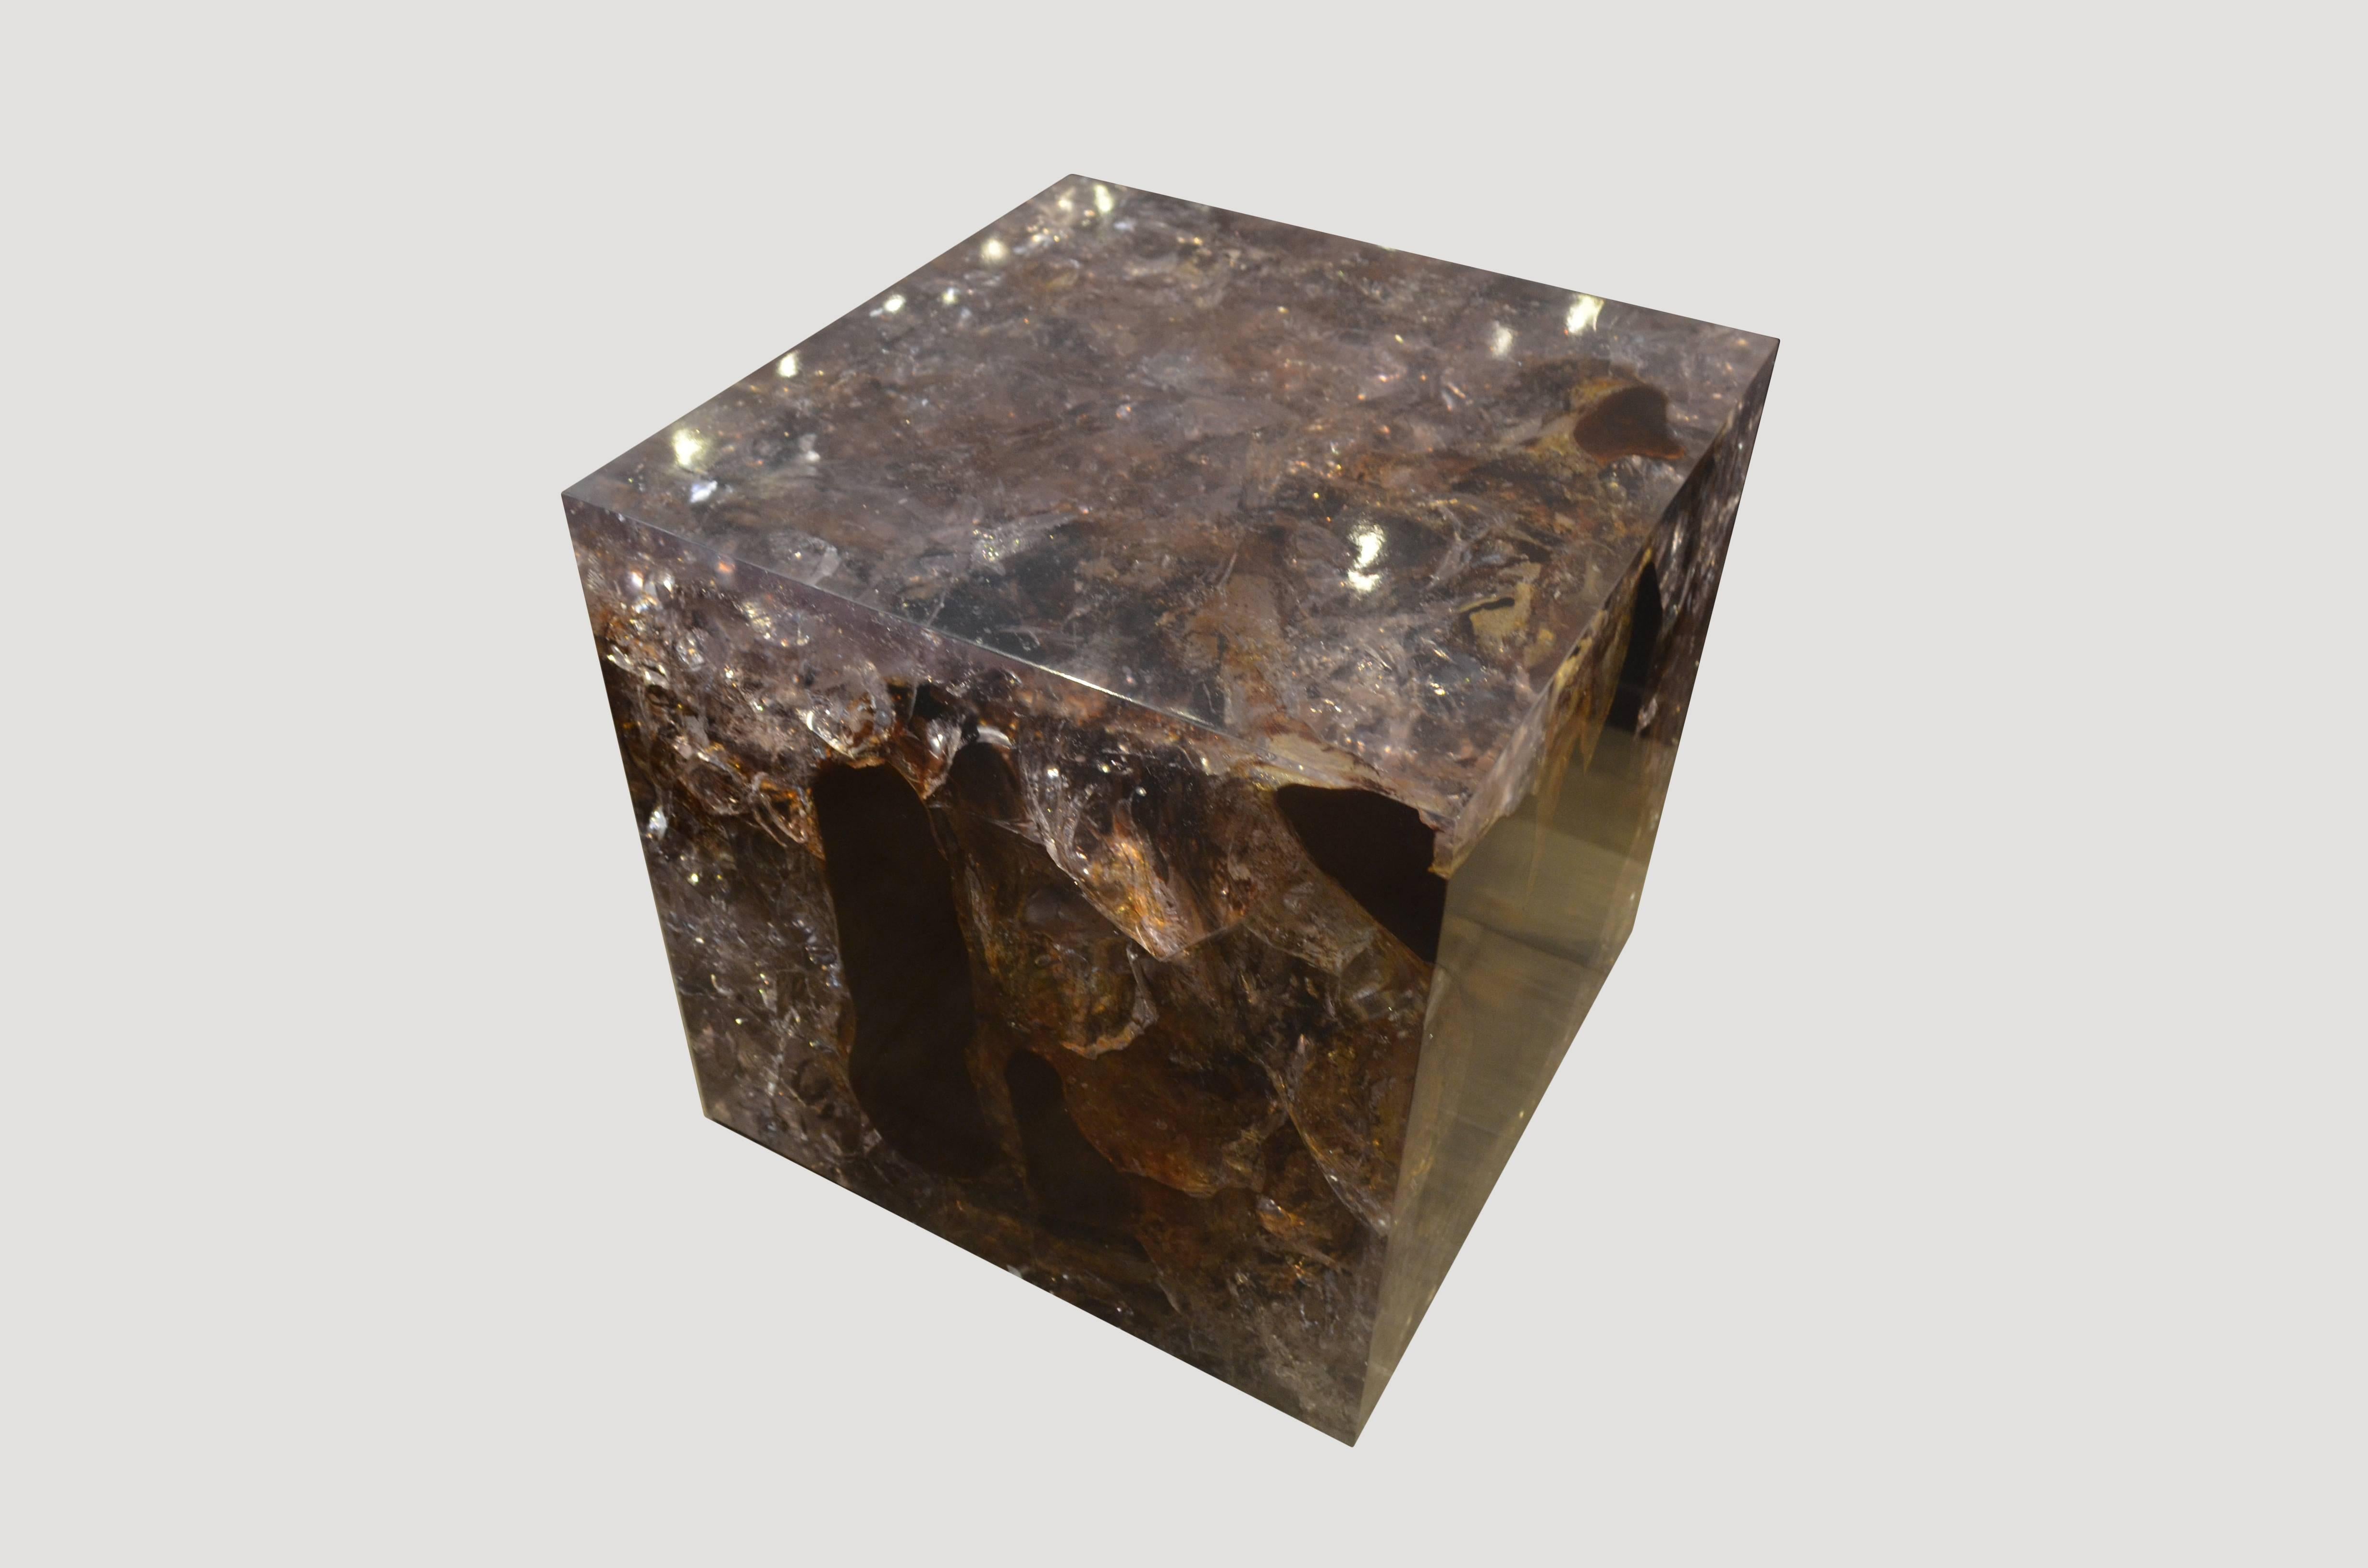 The cracked resin cocktail table is made from teak infused with resin. A dramatic piece due to the depth of the resin, which resembles a unique quartz crystal with many different facets. An impressive addition to any space.

The Cracked Resin